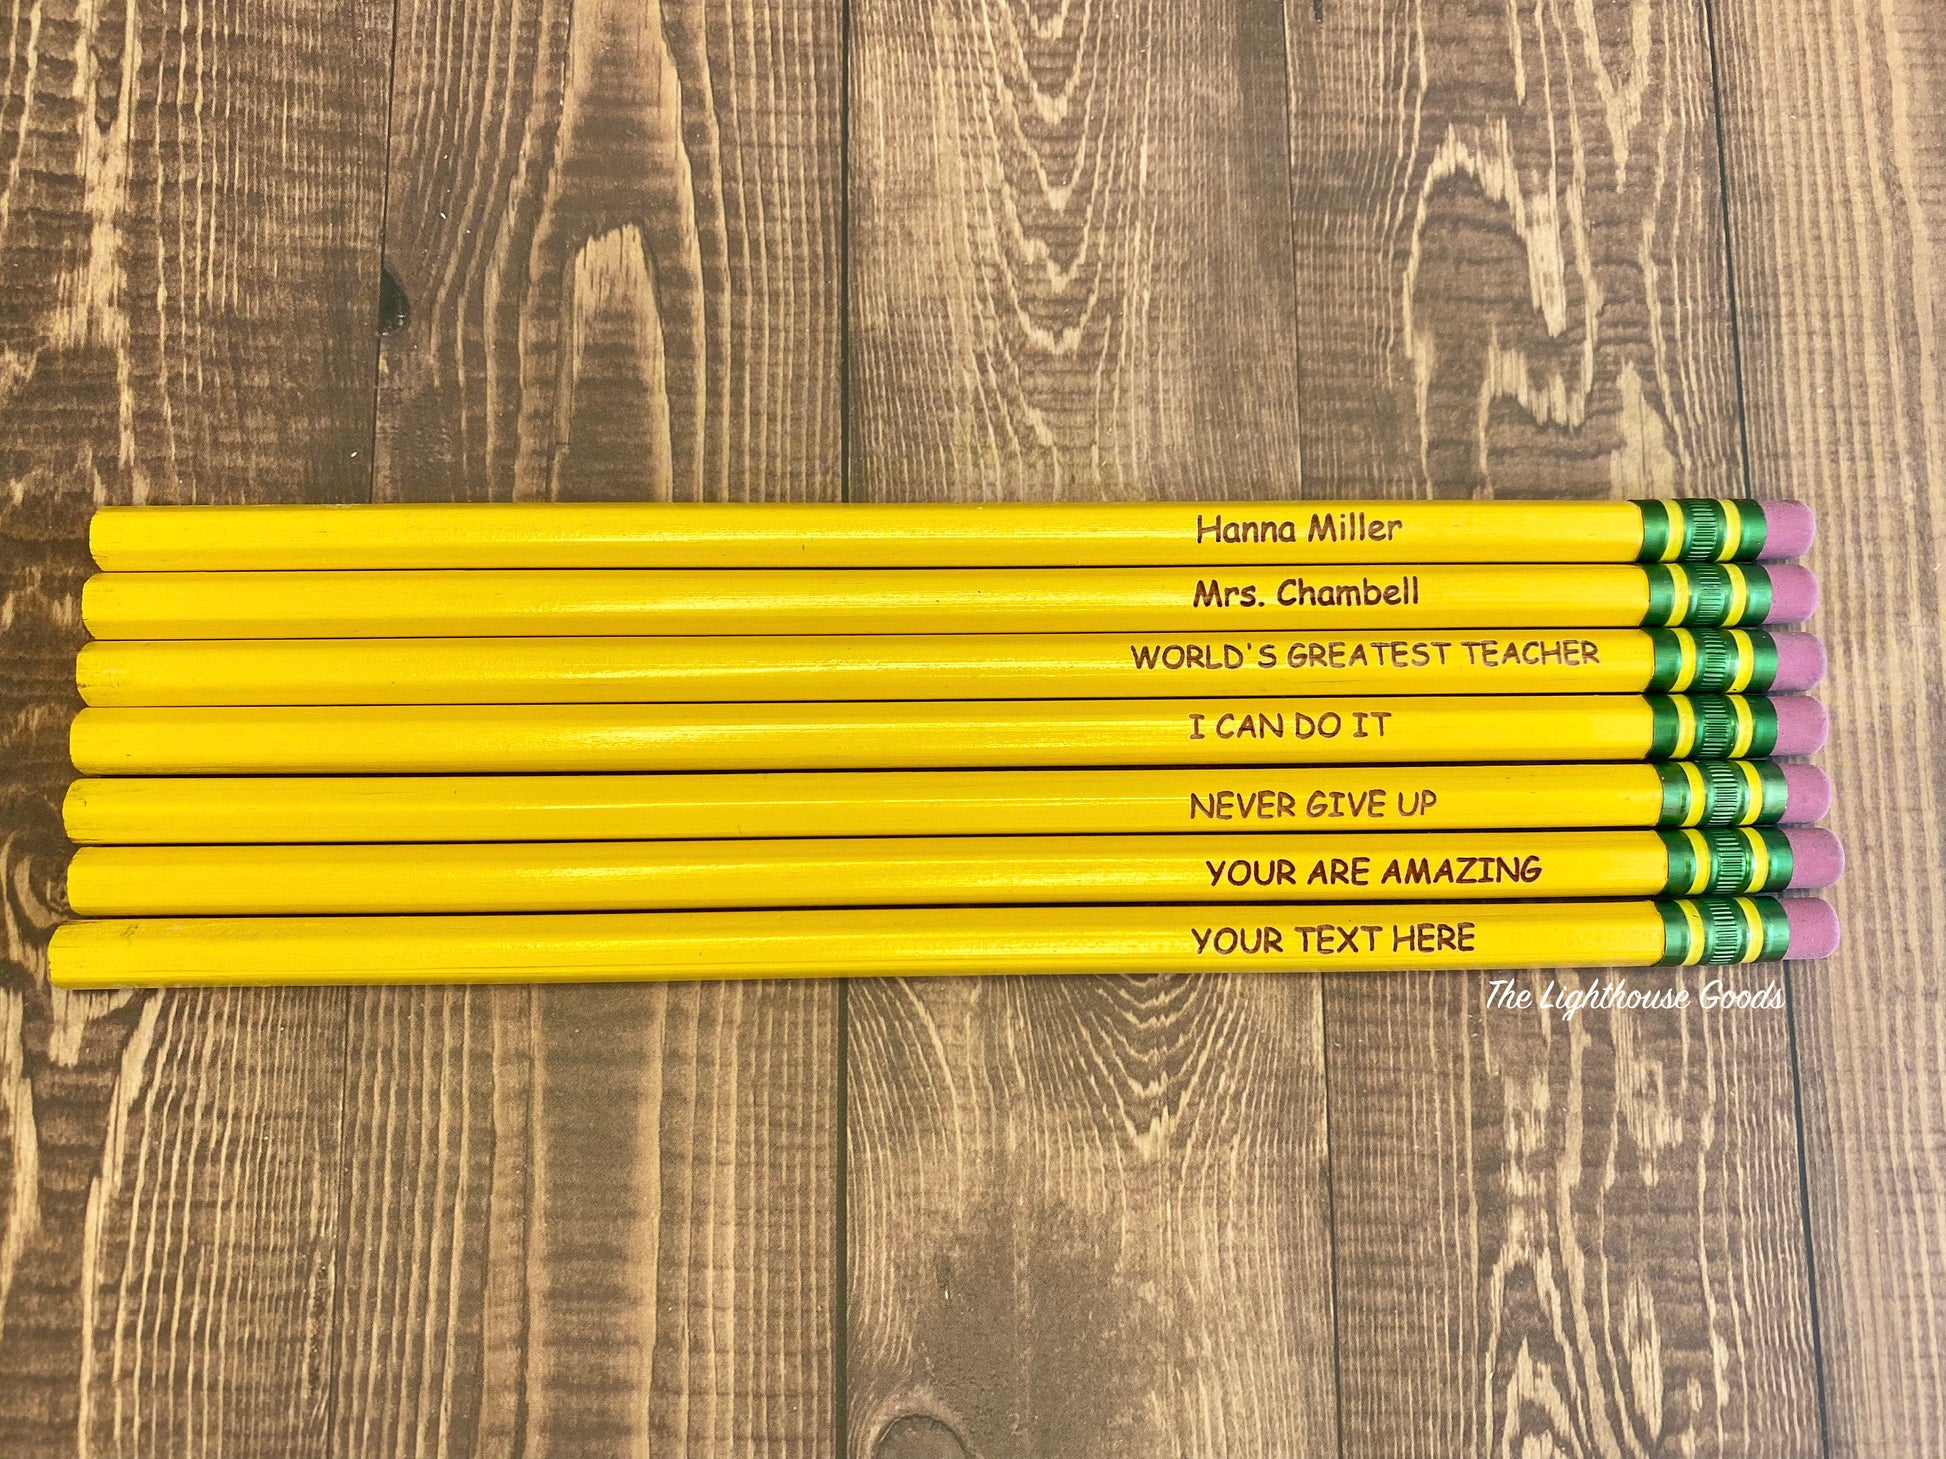 Personalized Pencils Custom Engraved Pencils Back to School Supplies office personalized Teacher Gift Ticonderoga Pencils Student Gift kids